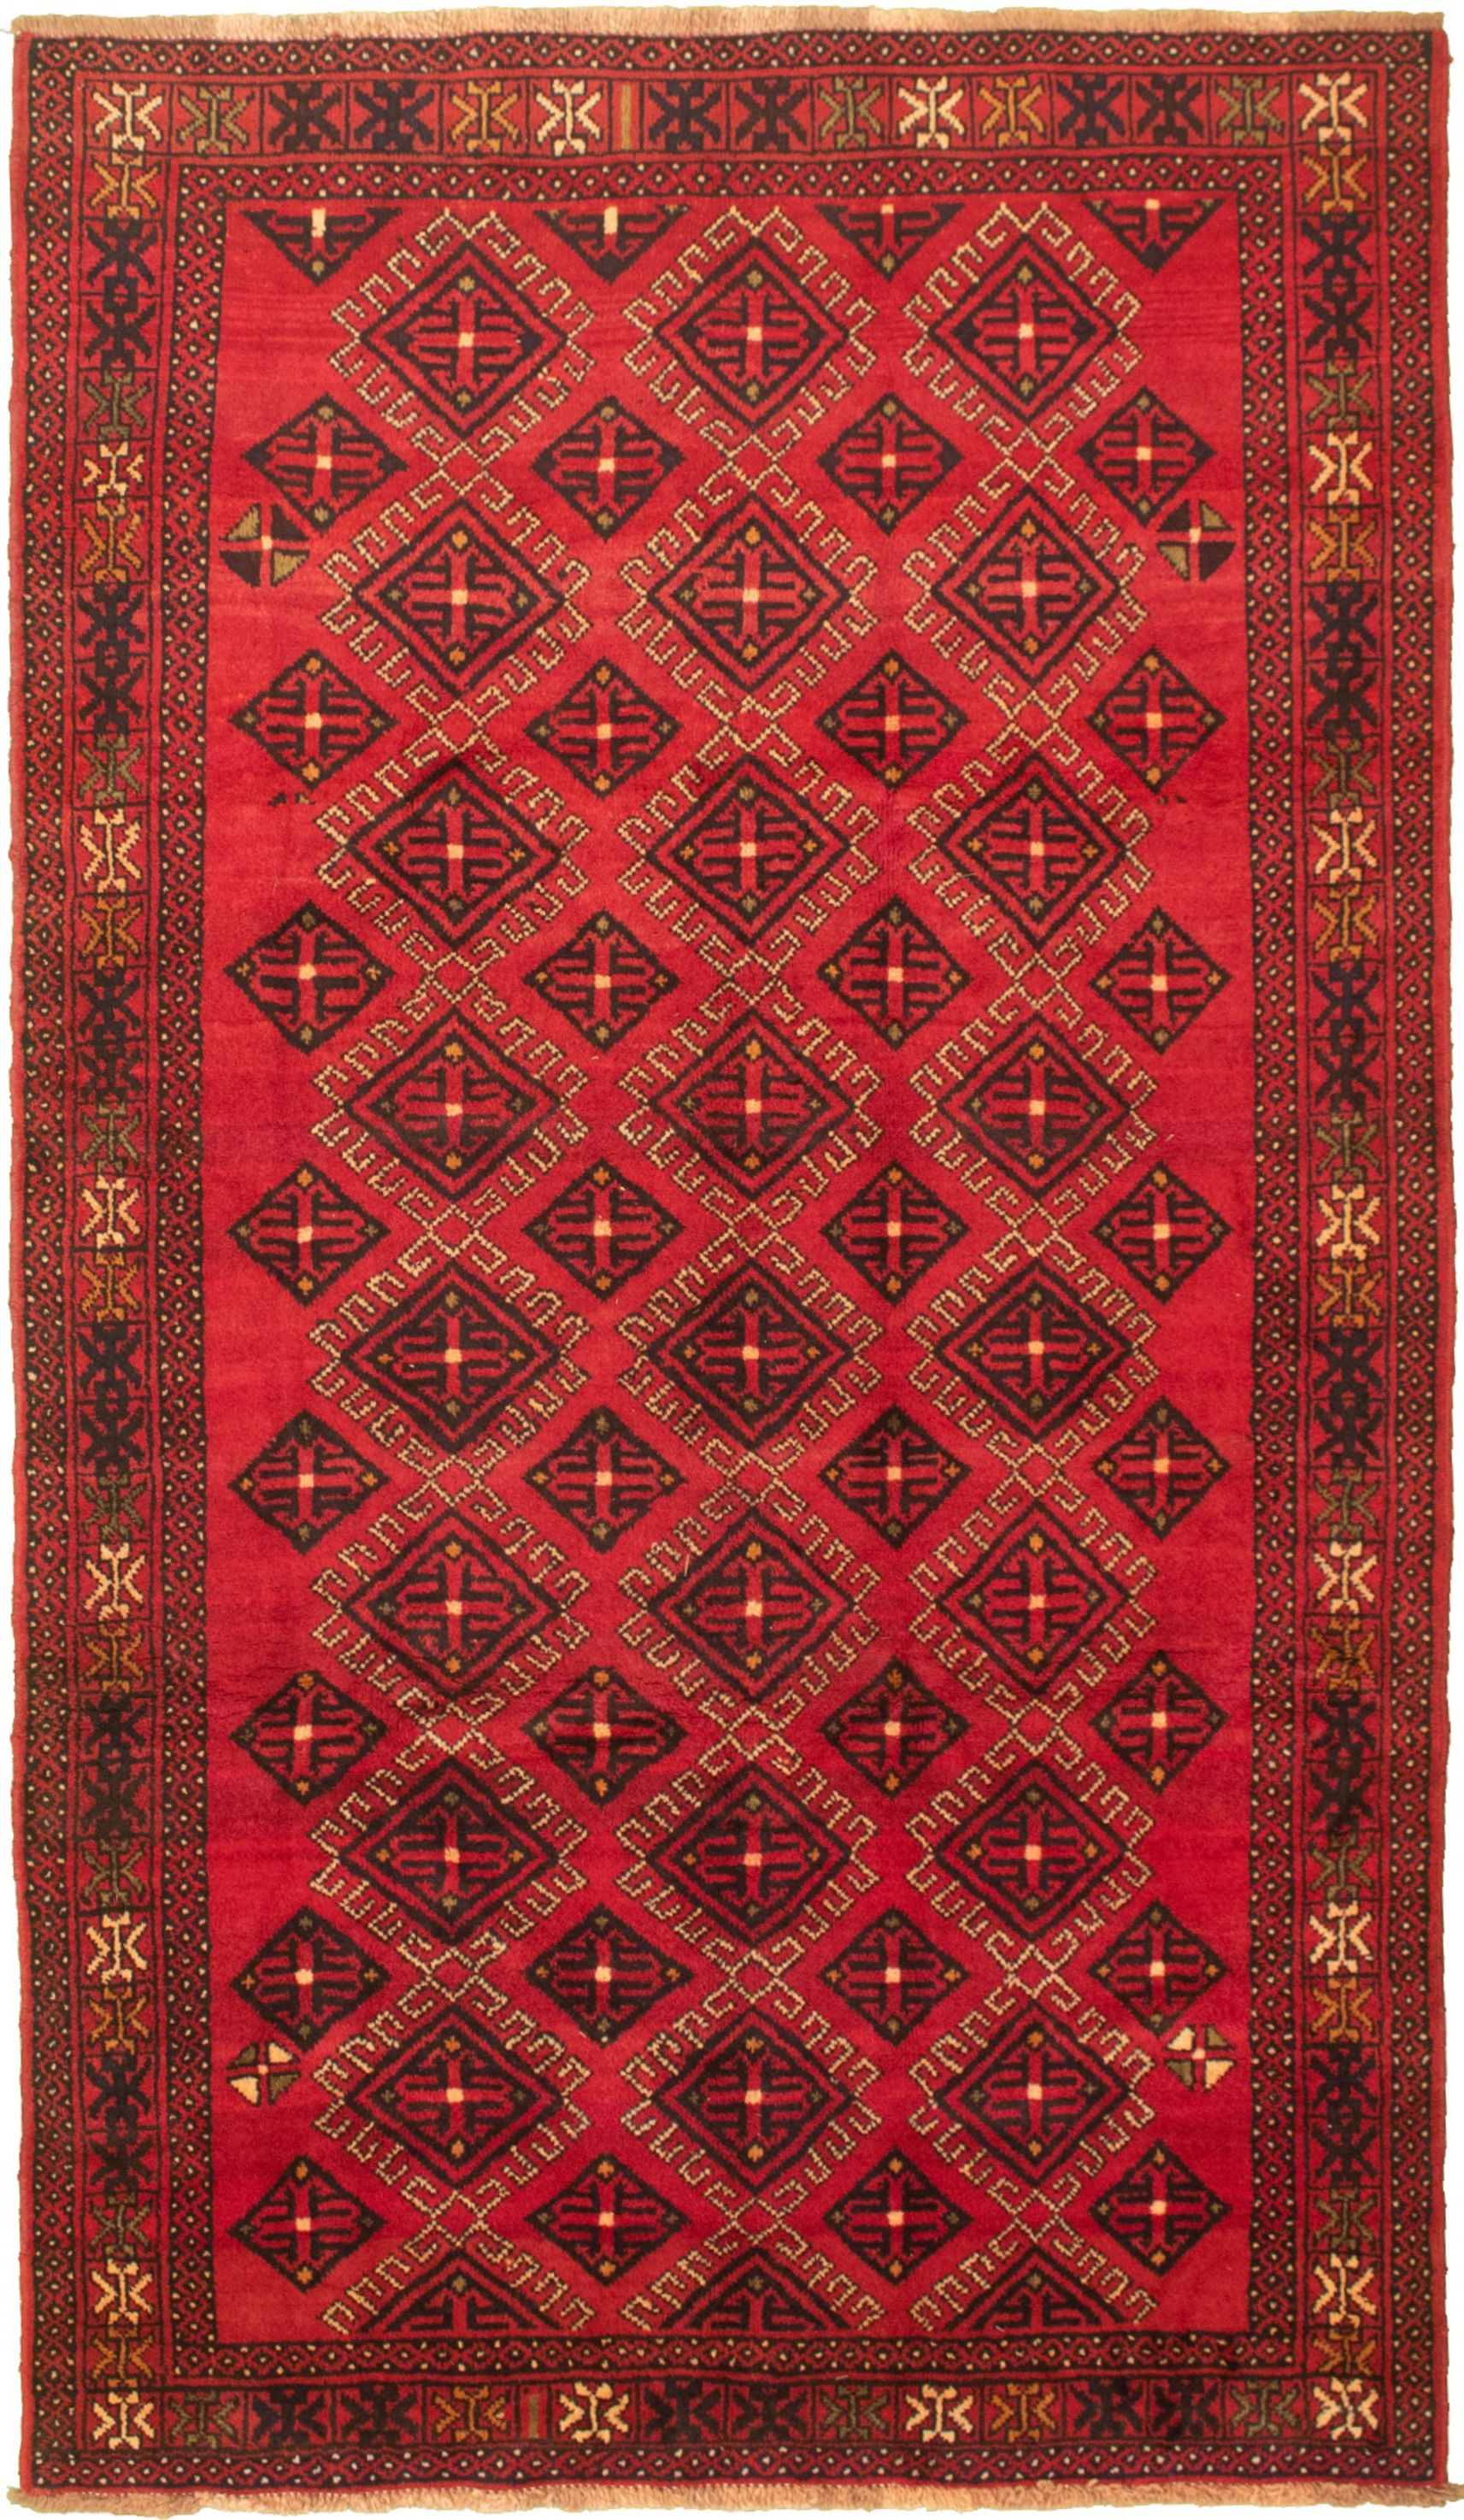 Hand-knotted Authentic Turkish Red Wool Rug 4'11" x 9'4"  Size: 4'11" x 9'4"  